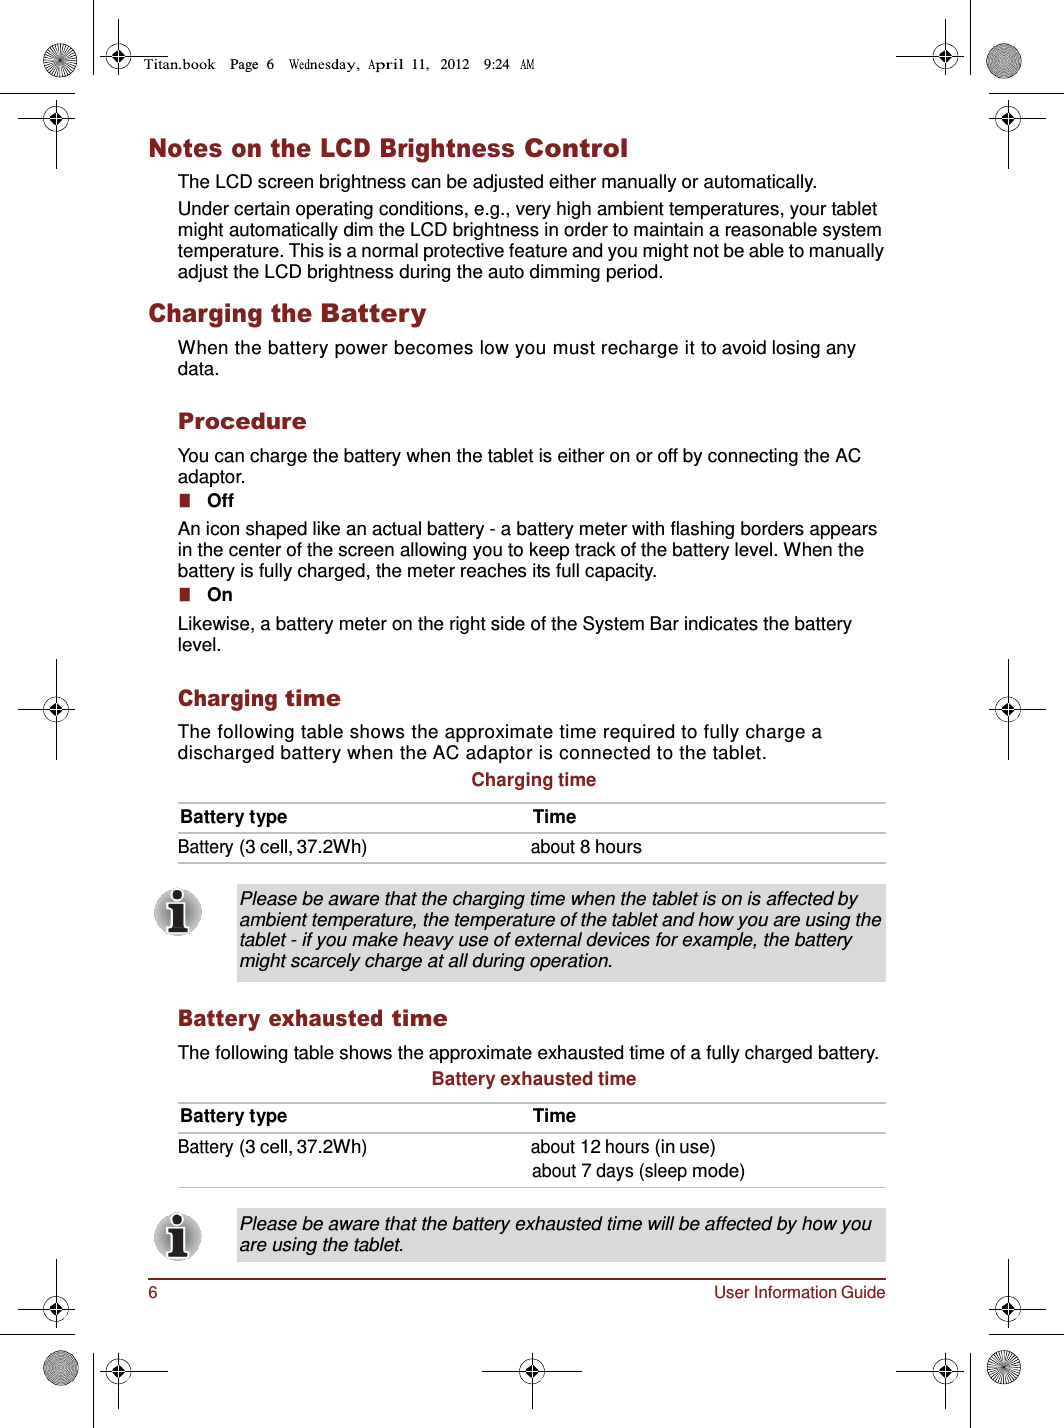 6 User Information Guide Page  6        11,   2012    9:24      Notes on the LCD Brightness Control The LCD screen brightness can be adjusted either manually or automatically. Under certain operating conditions, e.g., very high ambient temperatures, your tablet might automatically dim the LCD brightness in order to maintain a reasonable system temperature. This is a normal protective feature and you might not be able to manually adjust the LCD brightness during the auto dimming period.  Charging the Battery When the battery power becomes low you must recharge it to avoid losing any data.  Procedure You can charge the battery when the tablet is either on or off by connecting the AC adaptor. ■   Off An icon shaped like an actual battery - a battery meter with flashing borders appears in the center of the screen allowing you to keep track of the battery level. When the battery is fully charged, the meter reaches its full capacity. ■   On Likewise, a battery meter on the right side of the System Bar indicates the battery level.  Charging time The following table shows the approximate time required to fully charge a discharged battery when the AC adaptor is connected to the tablet. Charging time  Battery type  Time Battery (3 cell, 37.2Wh) about 8 hours  Please be aware that the charging time when the tablet is on is affected by ambient temperature, the temperature of the tablet and how you are using the tablet - if you make heavy use of external devices for example, the battery might scarcely charge at all during operation.  Battery exhausted time The following table shows the approximate exhausted time of a fully charged battery. Battery exhausted time  Battery type  Time Battery (3 cell, 37.2Wh) about 12 hours (in use) about 7 days (sleep mode)   Please be aware that the battery exhausted time will be affected by how you are using the tablet. 